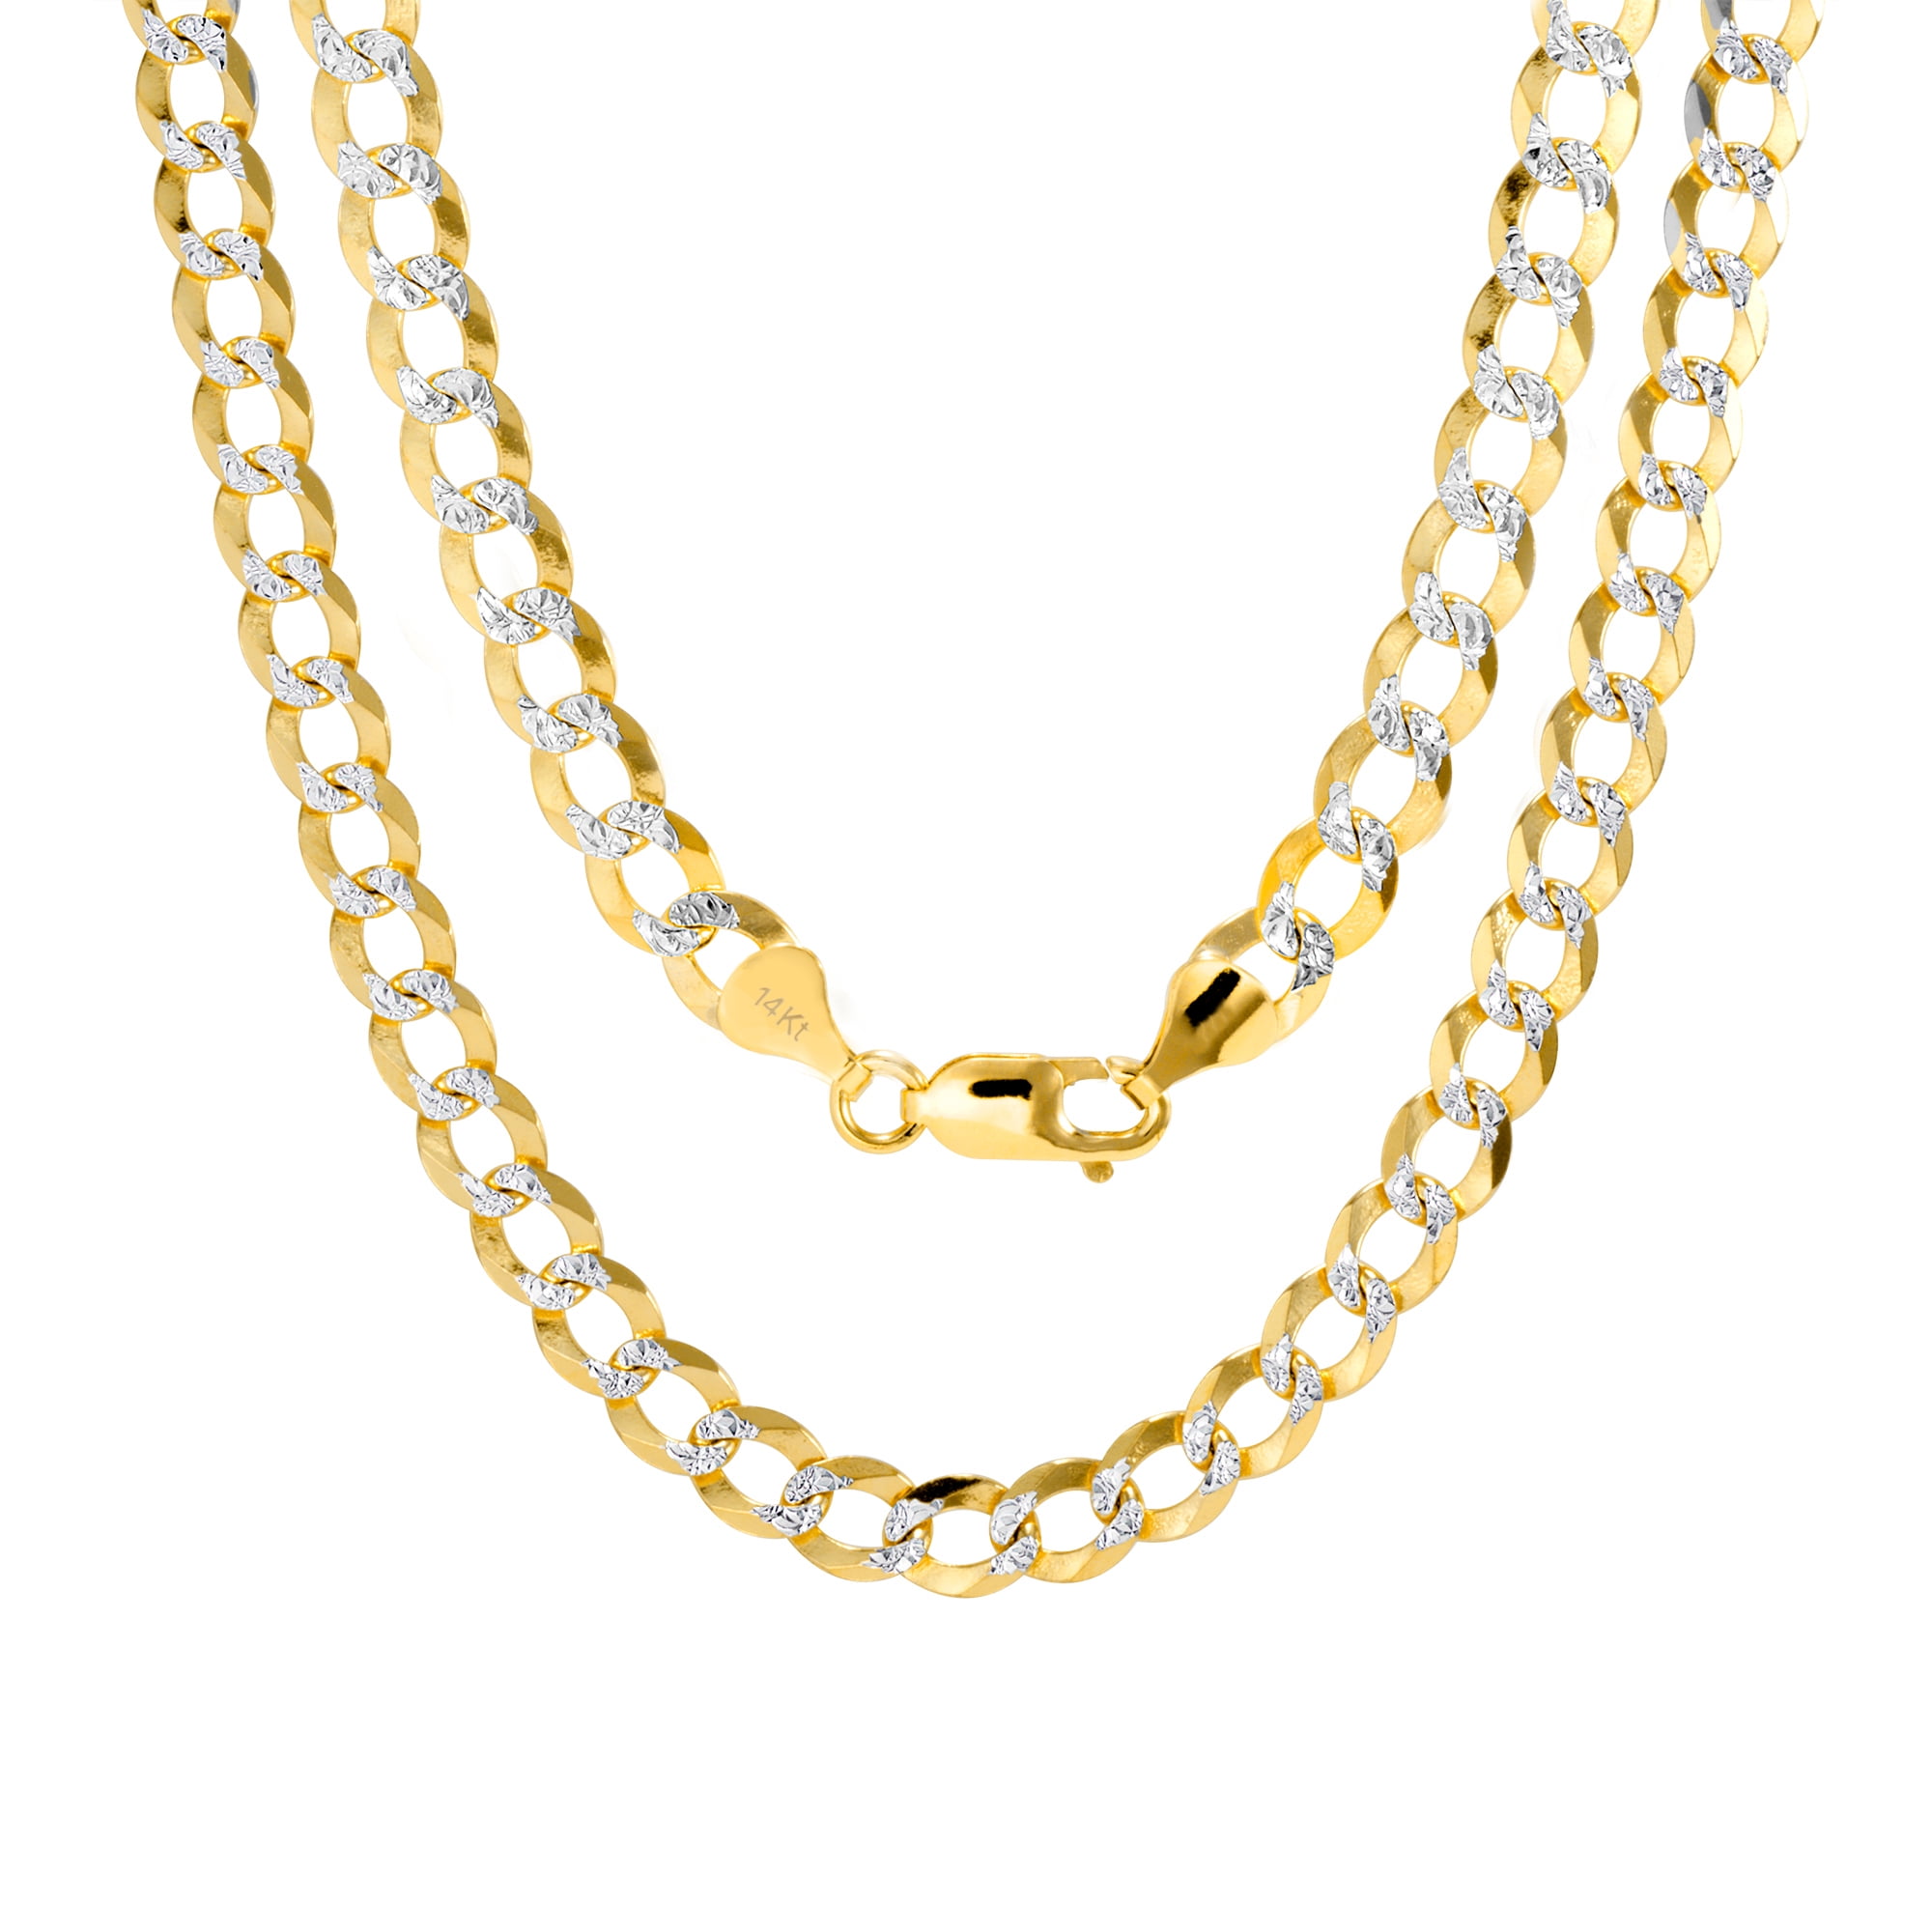 14K Yellow Gold Diamond Cut 6.7mm Cuban Curb Link Chain Necklace 28”